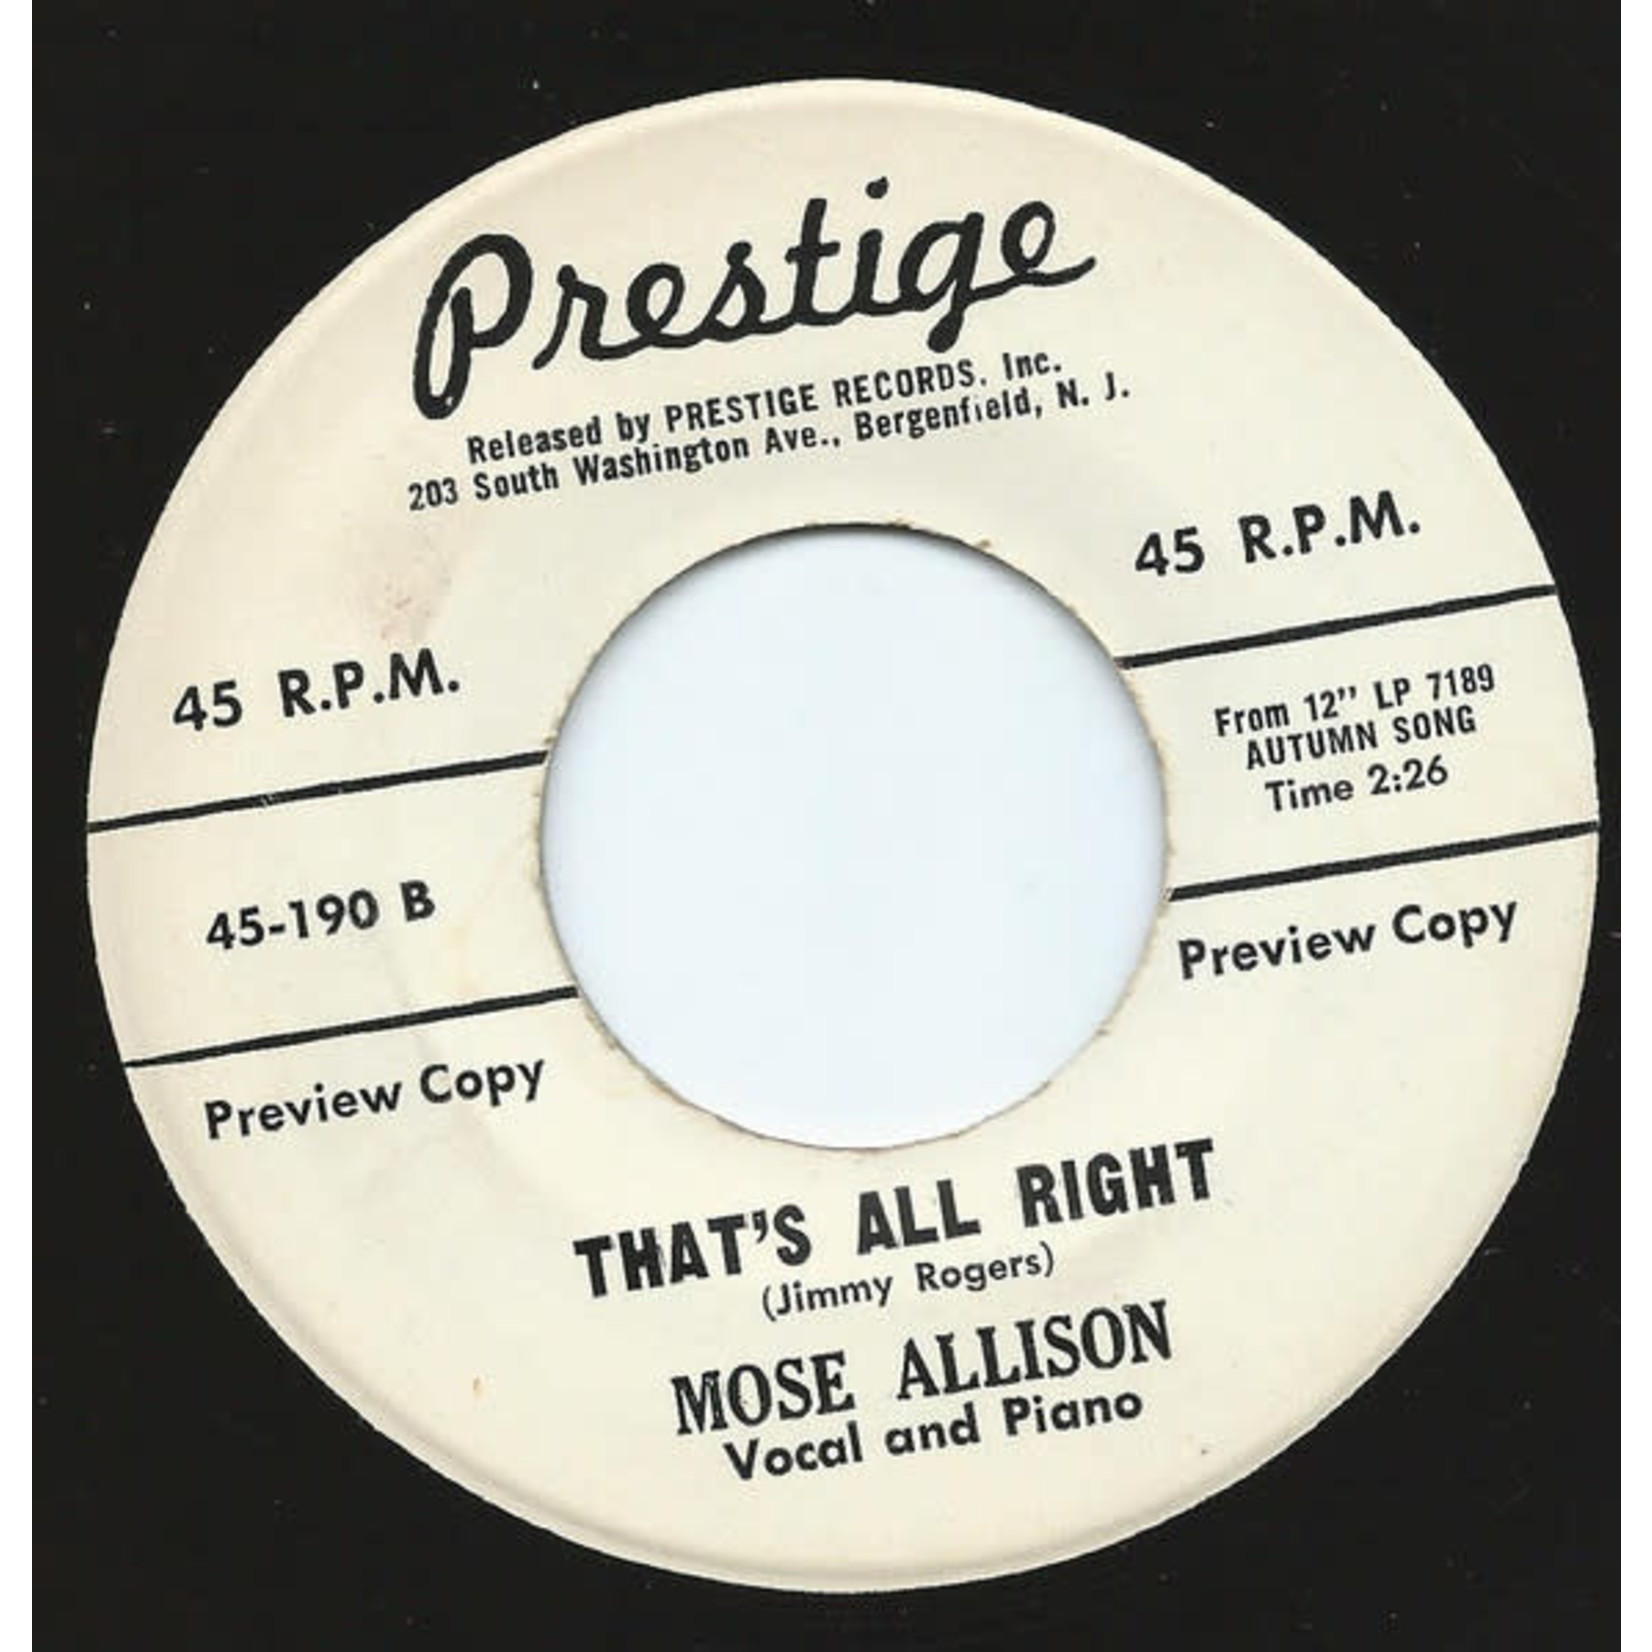 Prestige Mose Allison - Eyesight to the Blind / That's All Right (7") [Preview] {VG+}